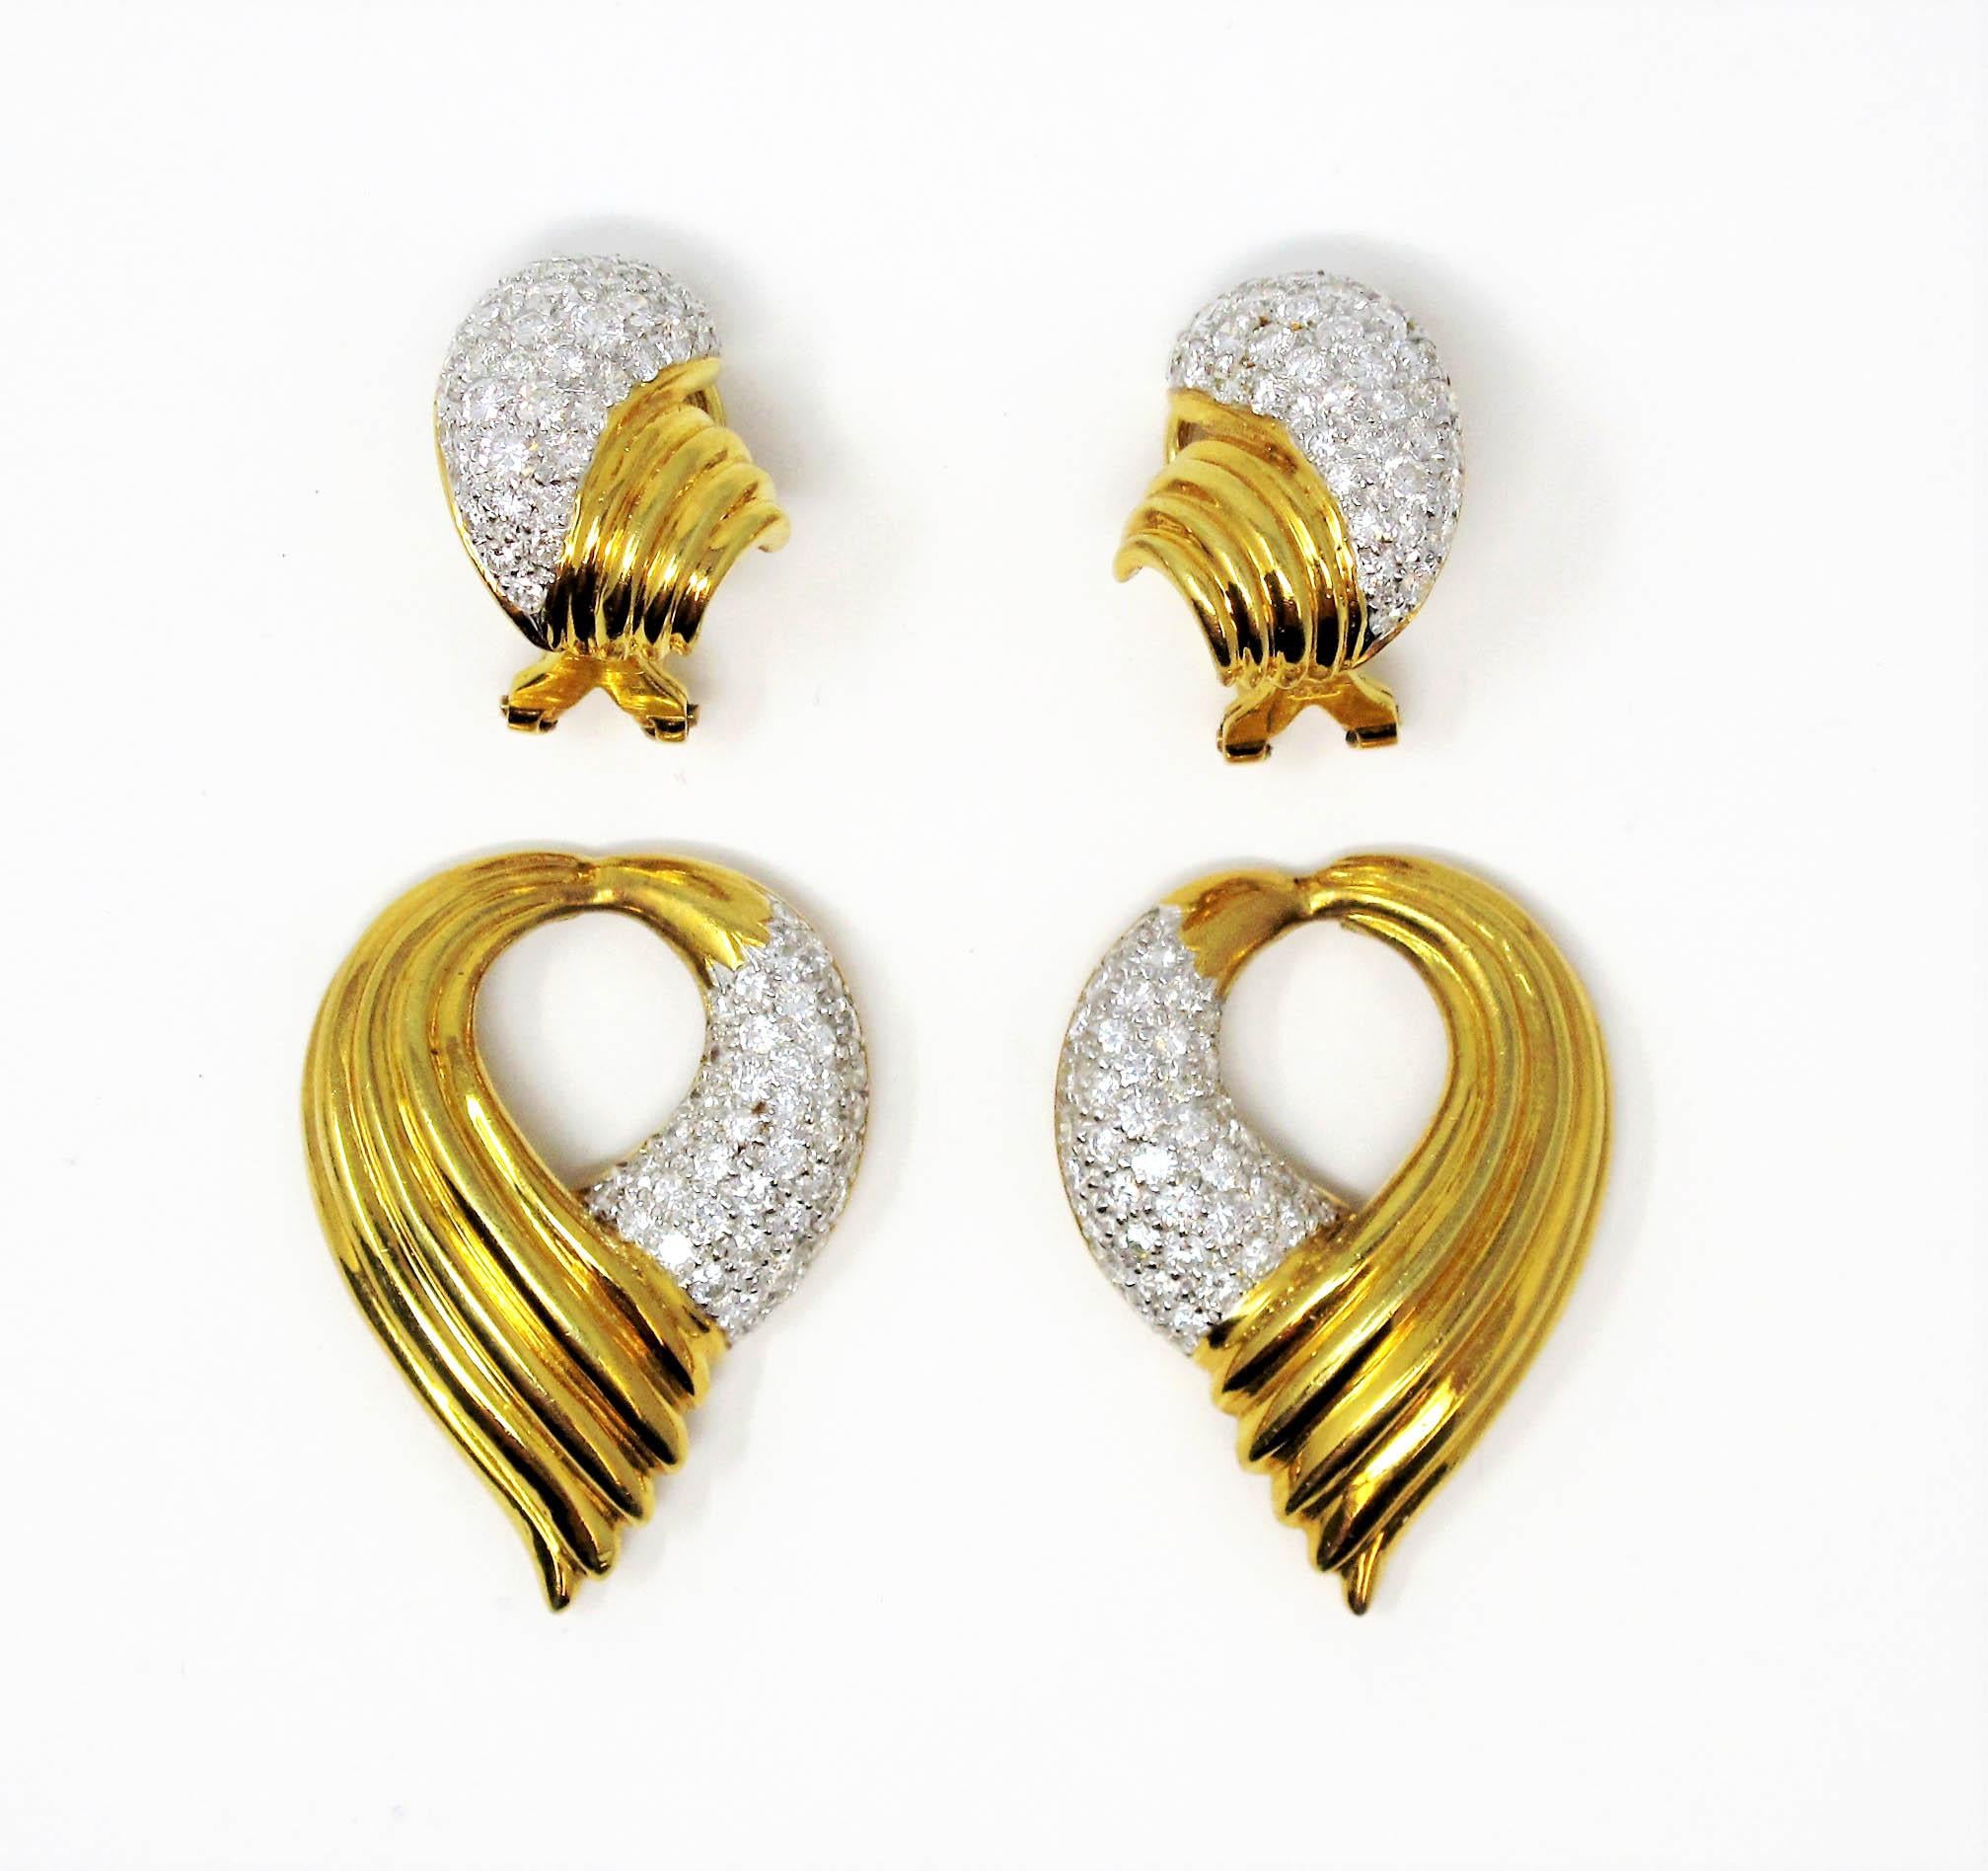 Spectacular pave diamond and 18 karat gold door knocker earrings. Featuring a grooved polished gold body with domed pave diamond embellishments, we love how these versatile beauties can be worn with or without the optional dangle. When worn alone,